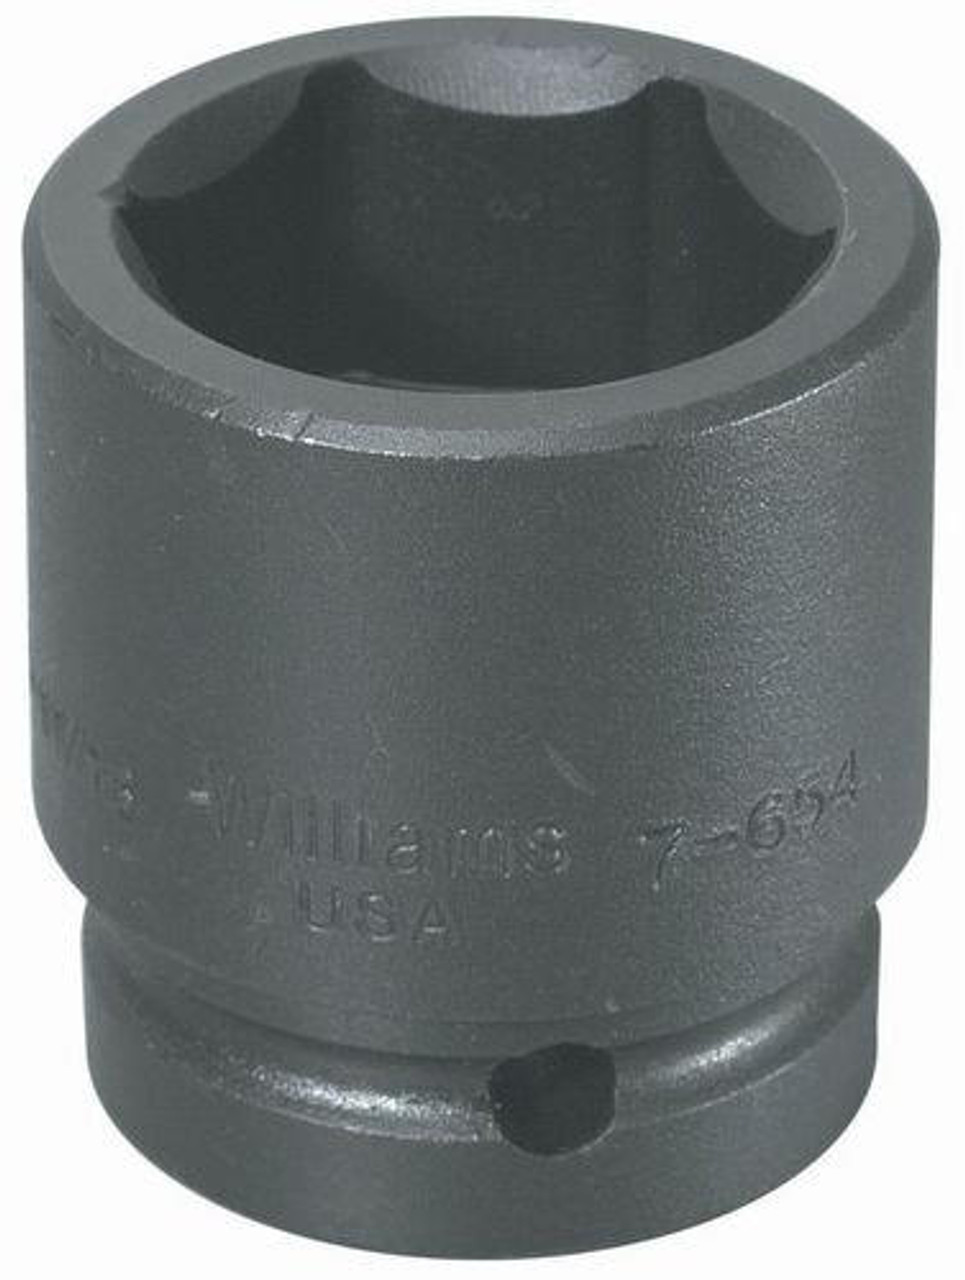 Williams Made In USA 2 5/16" Williams 1" Dr Shallow Impact Socket 6 Pt - 7-674 